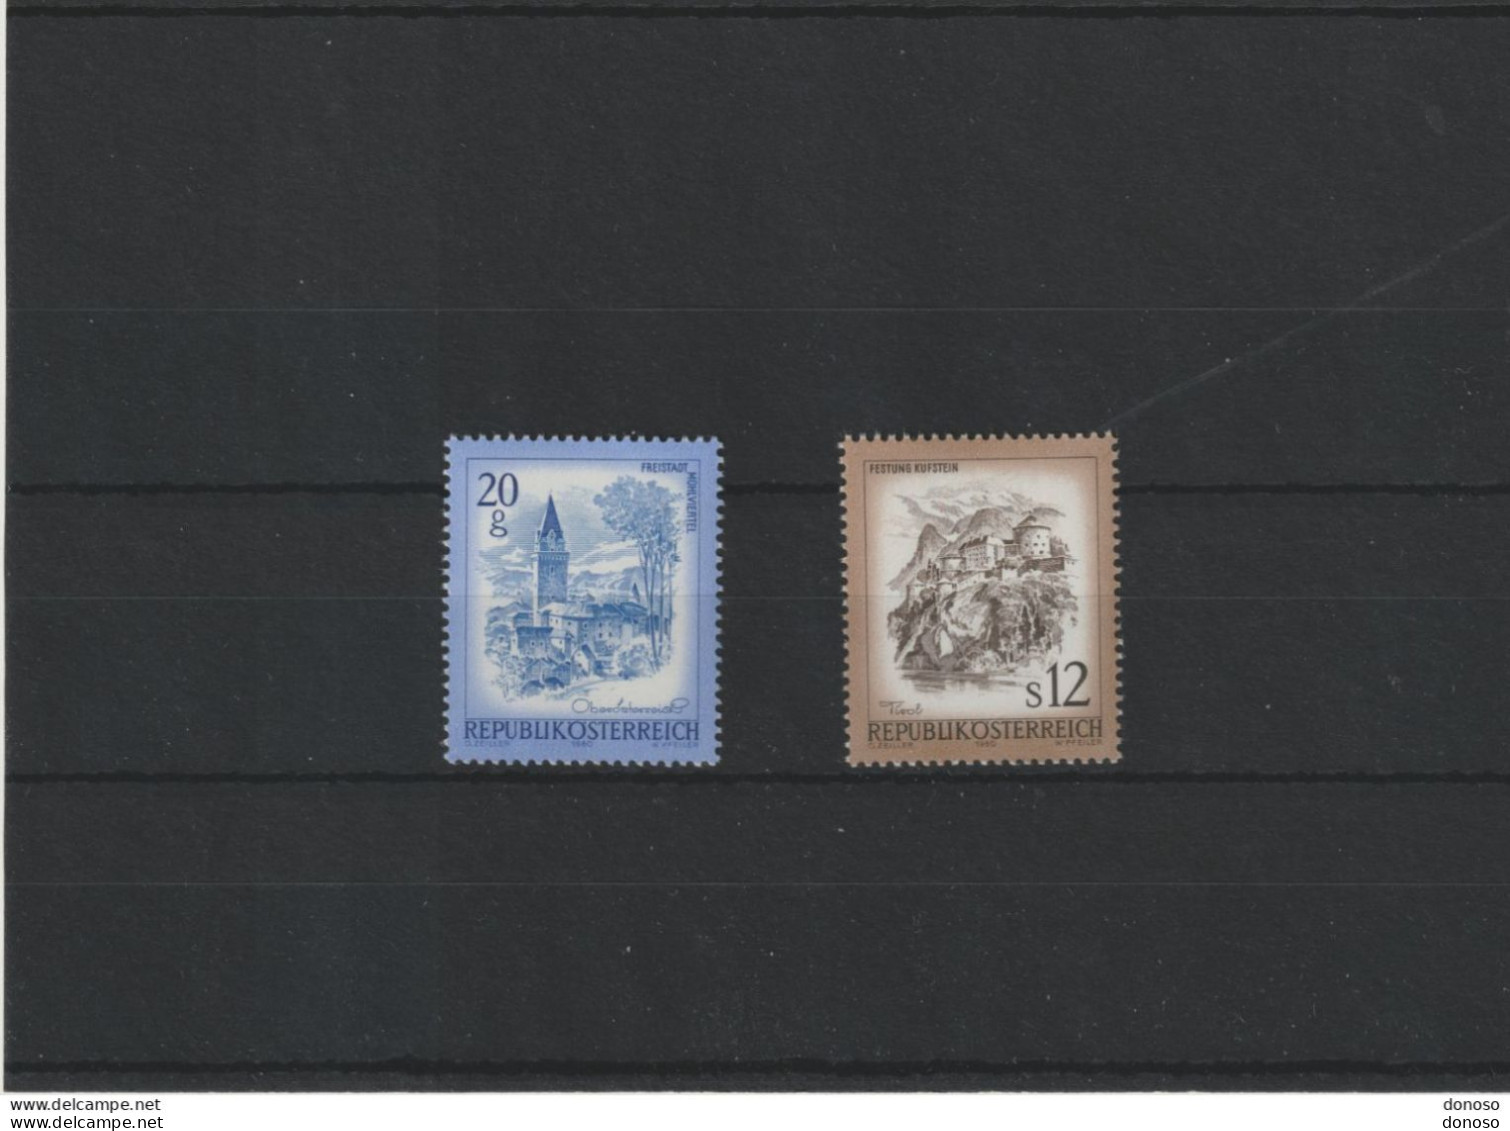 AUTRICHE 1980 Série Courante, Paysages Yvert 1478-1479 NEUF** MNH Cote 4,50 Euros - Unused Stamps